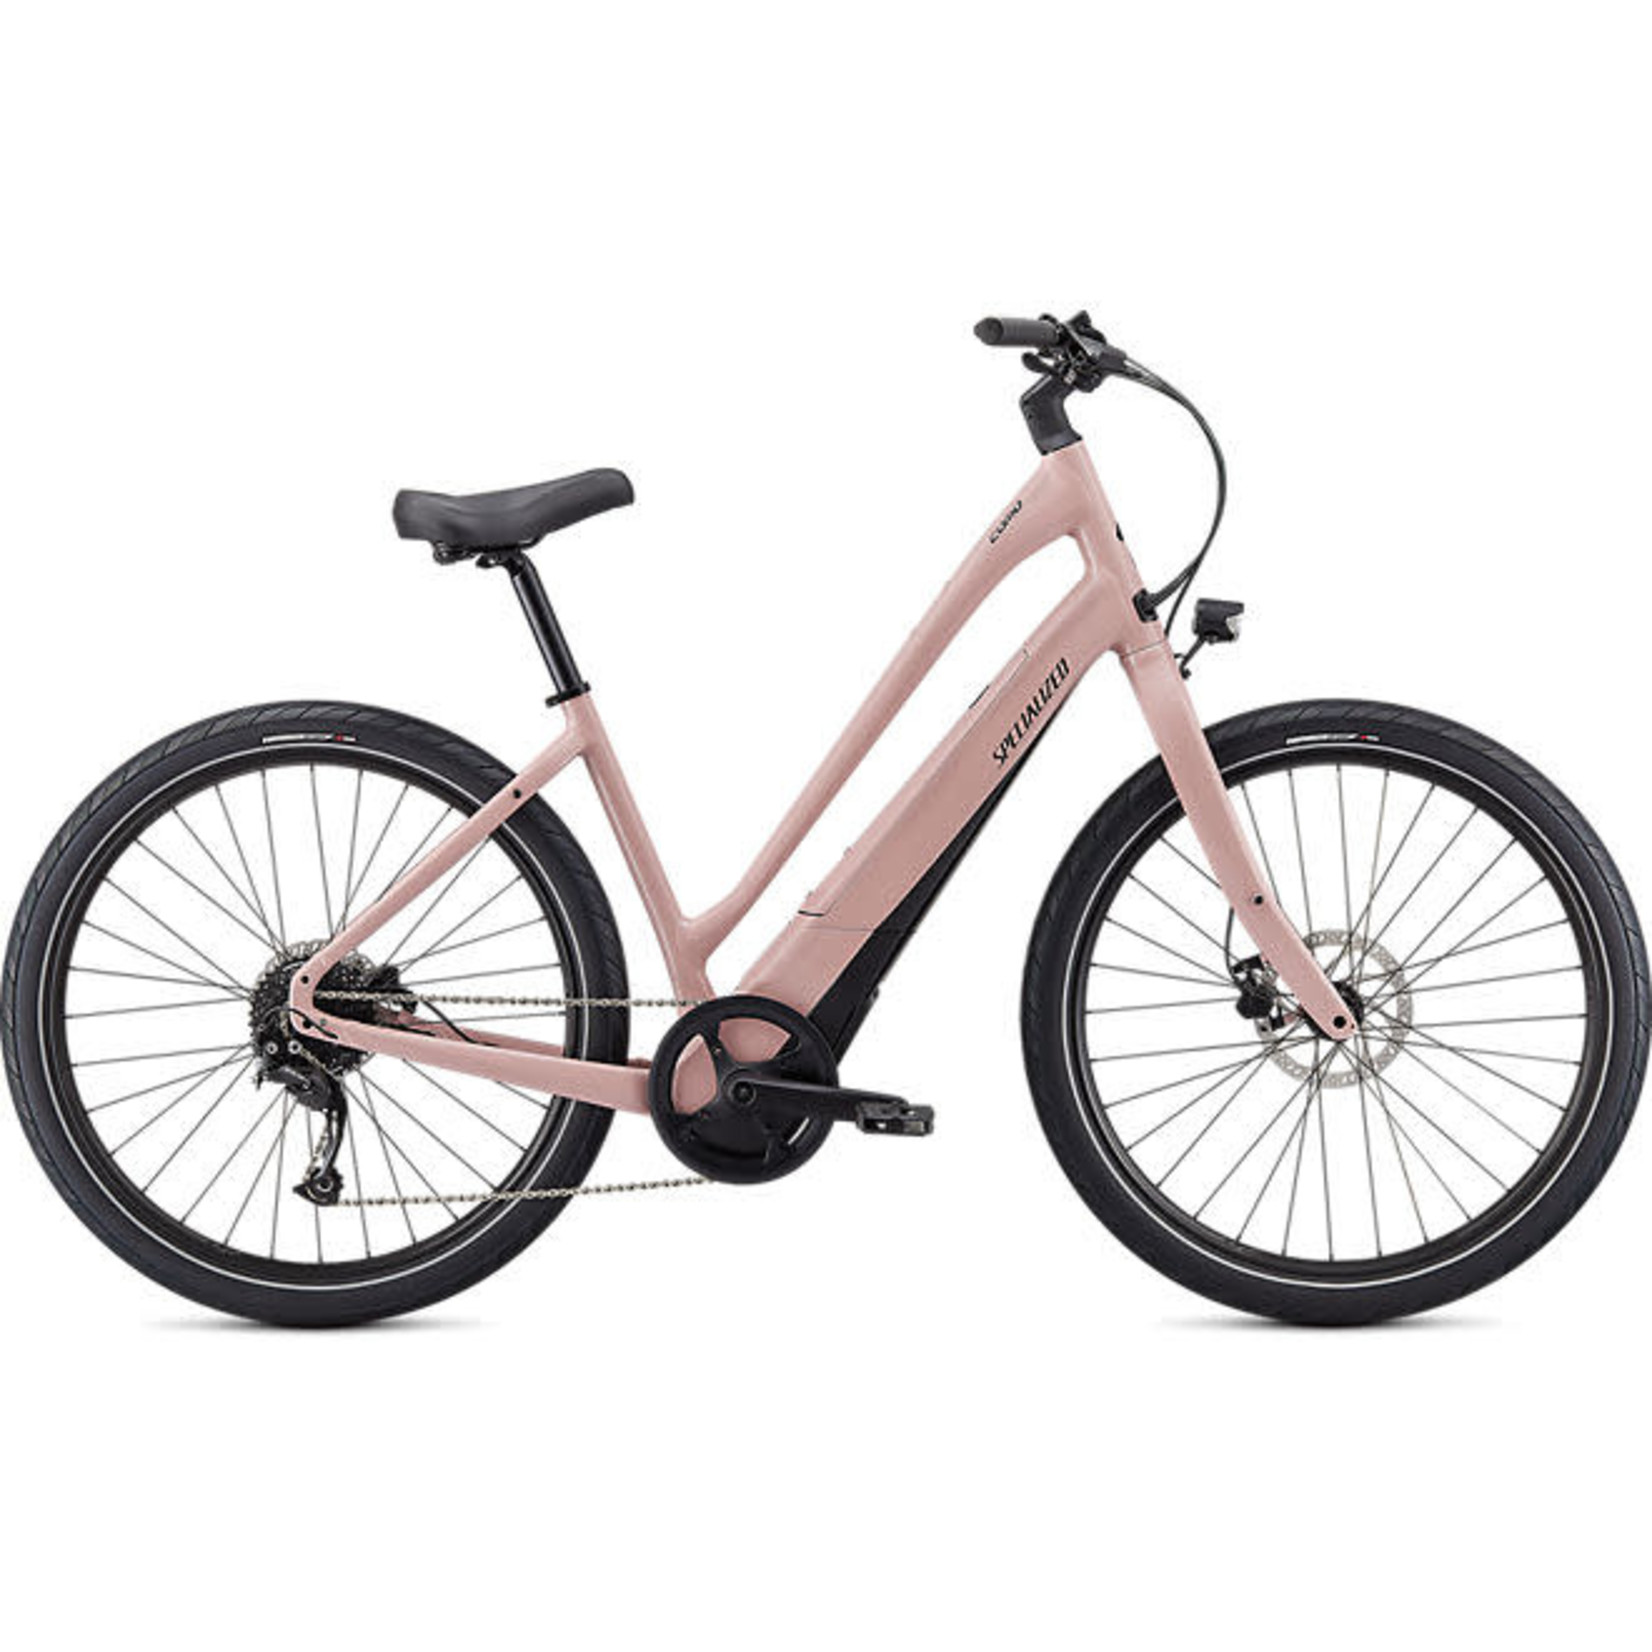 Specialized 2021 Specialized Como 3.0 Low Entry 650B - Small - Blush Pink/Black